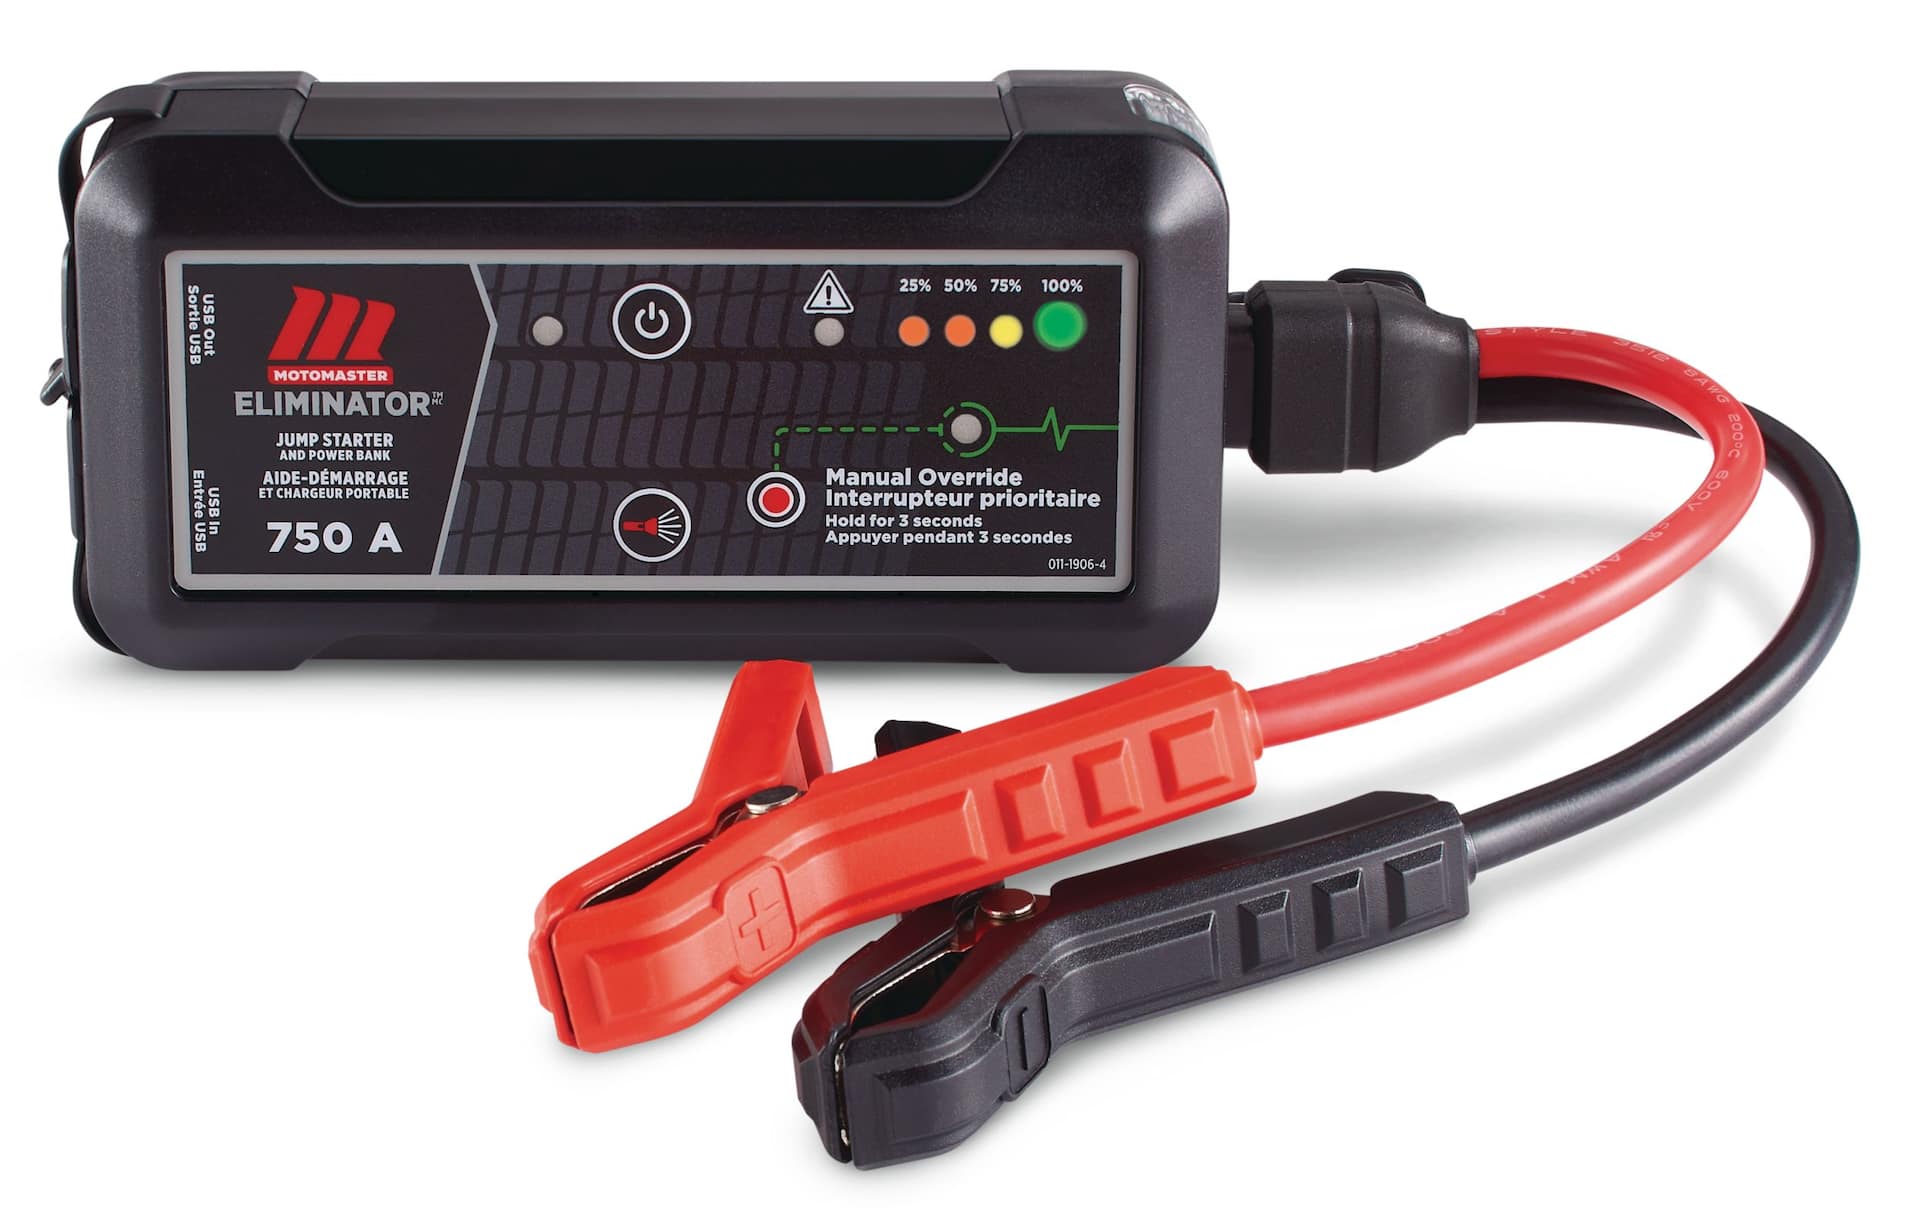 https://media-www.canadiantire.ca/product/automotive/light-auto-parts/auto-battery-accessories/0111906/motomaster-eliminator-750a-lithium-jump-starter-1f7734b2-76f0-4ad3-8670-a6a13aab241c-jpgrendition.jpg